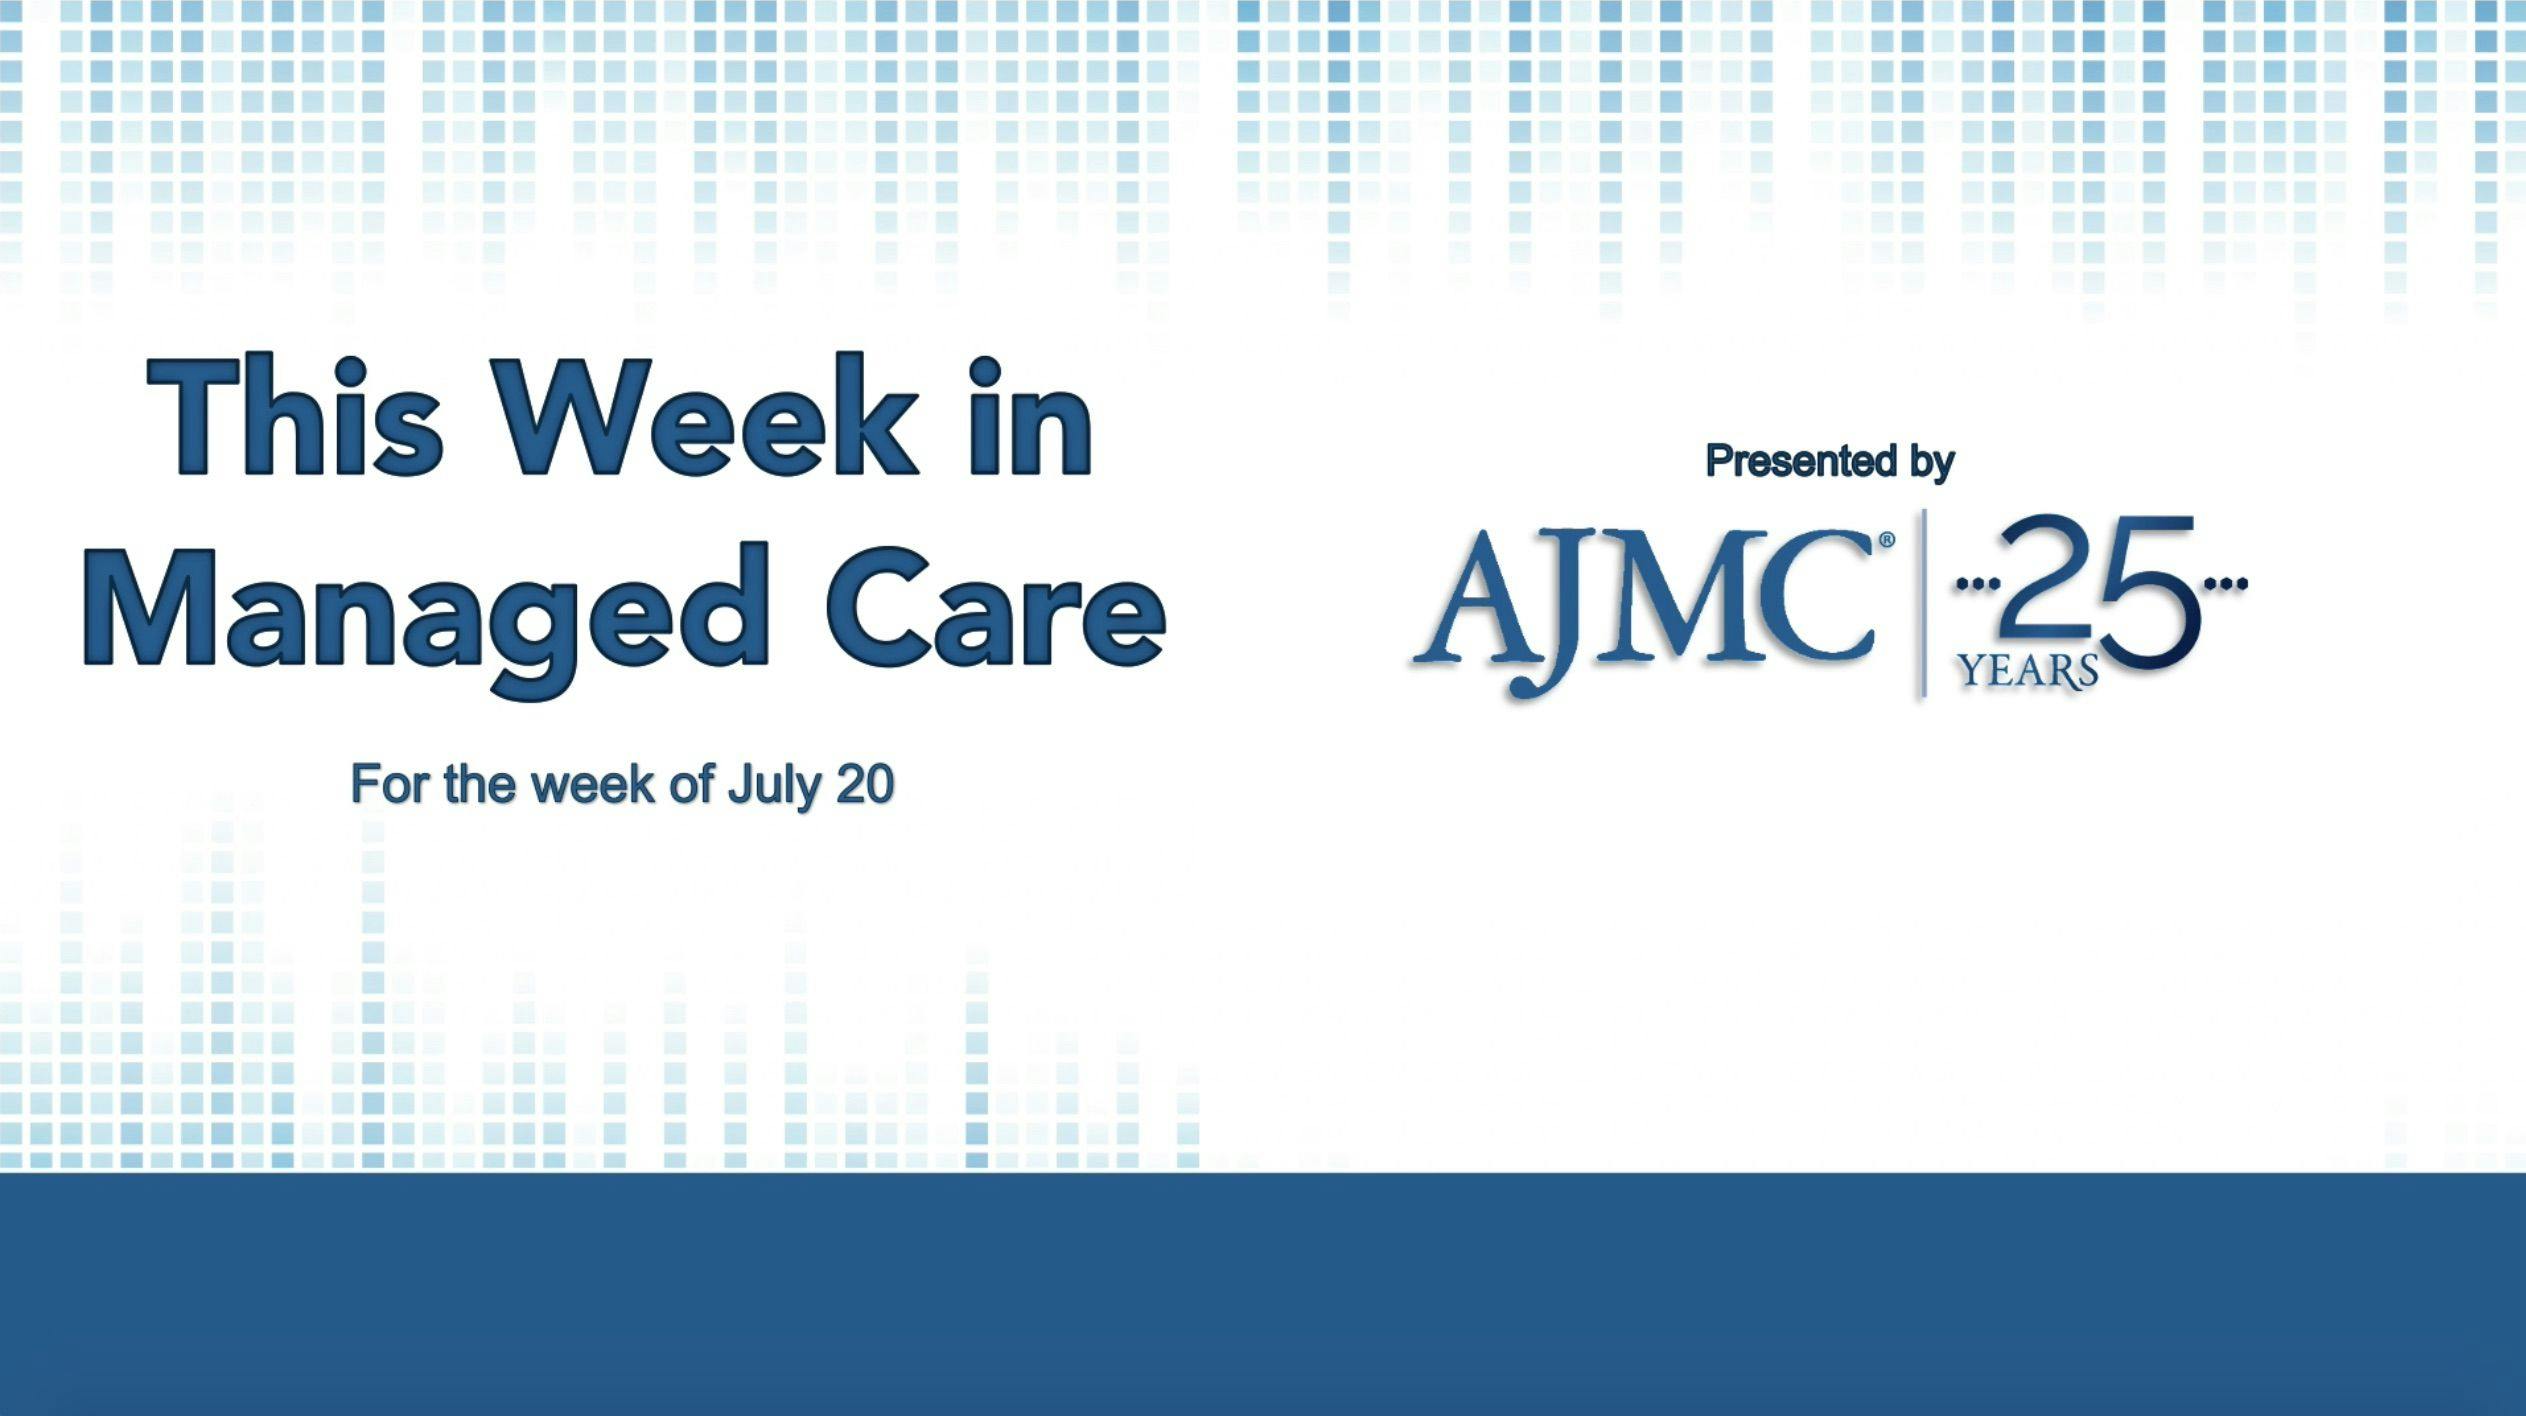 This Week in Managed Care: July 24, 2020